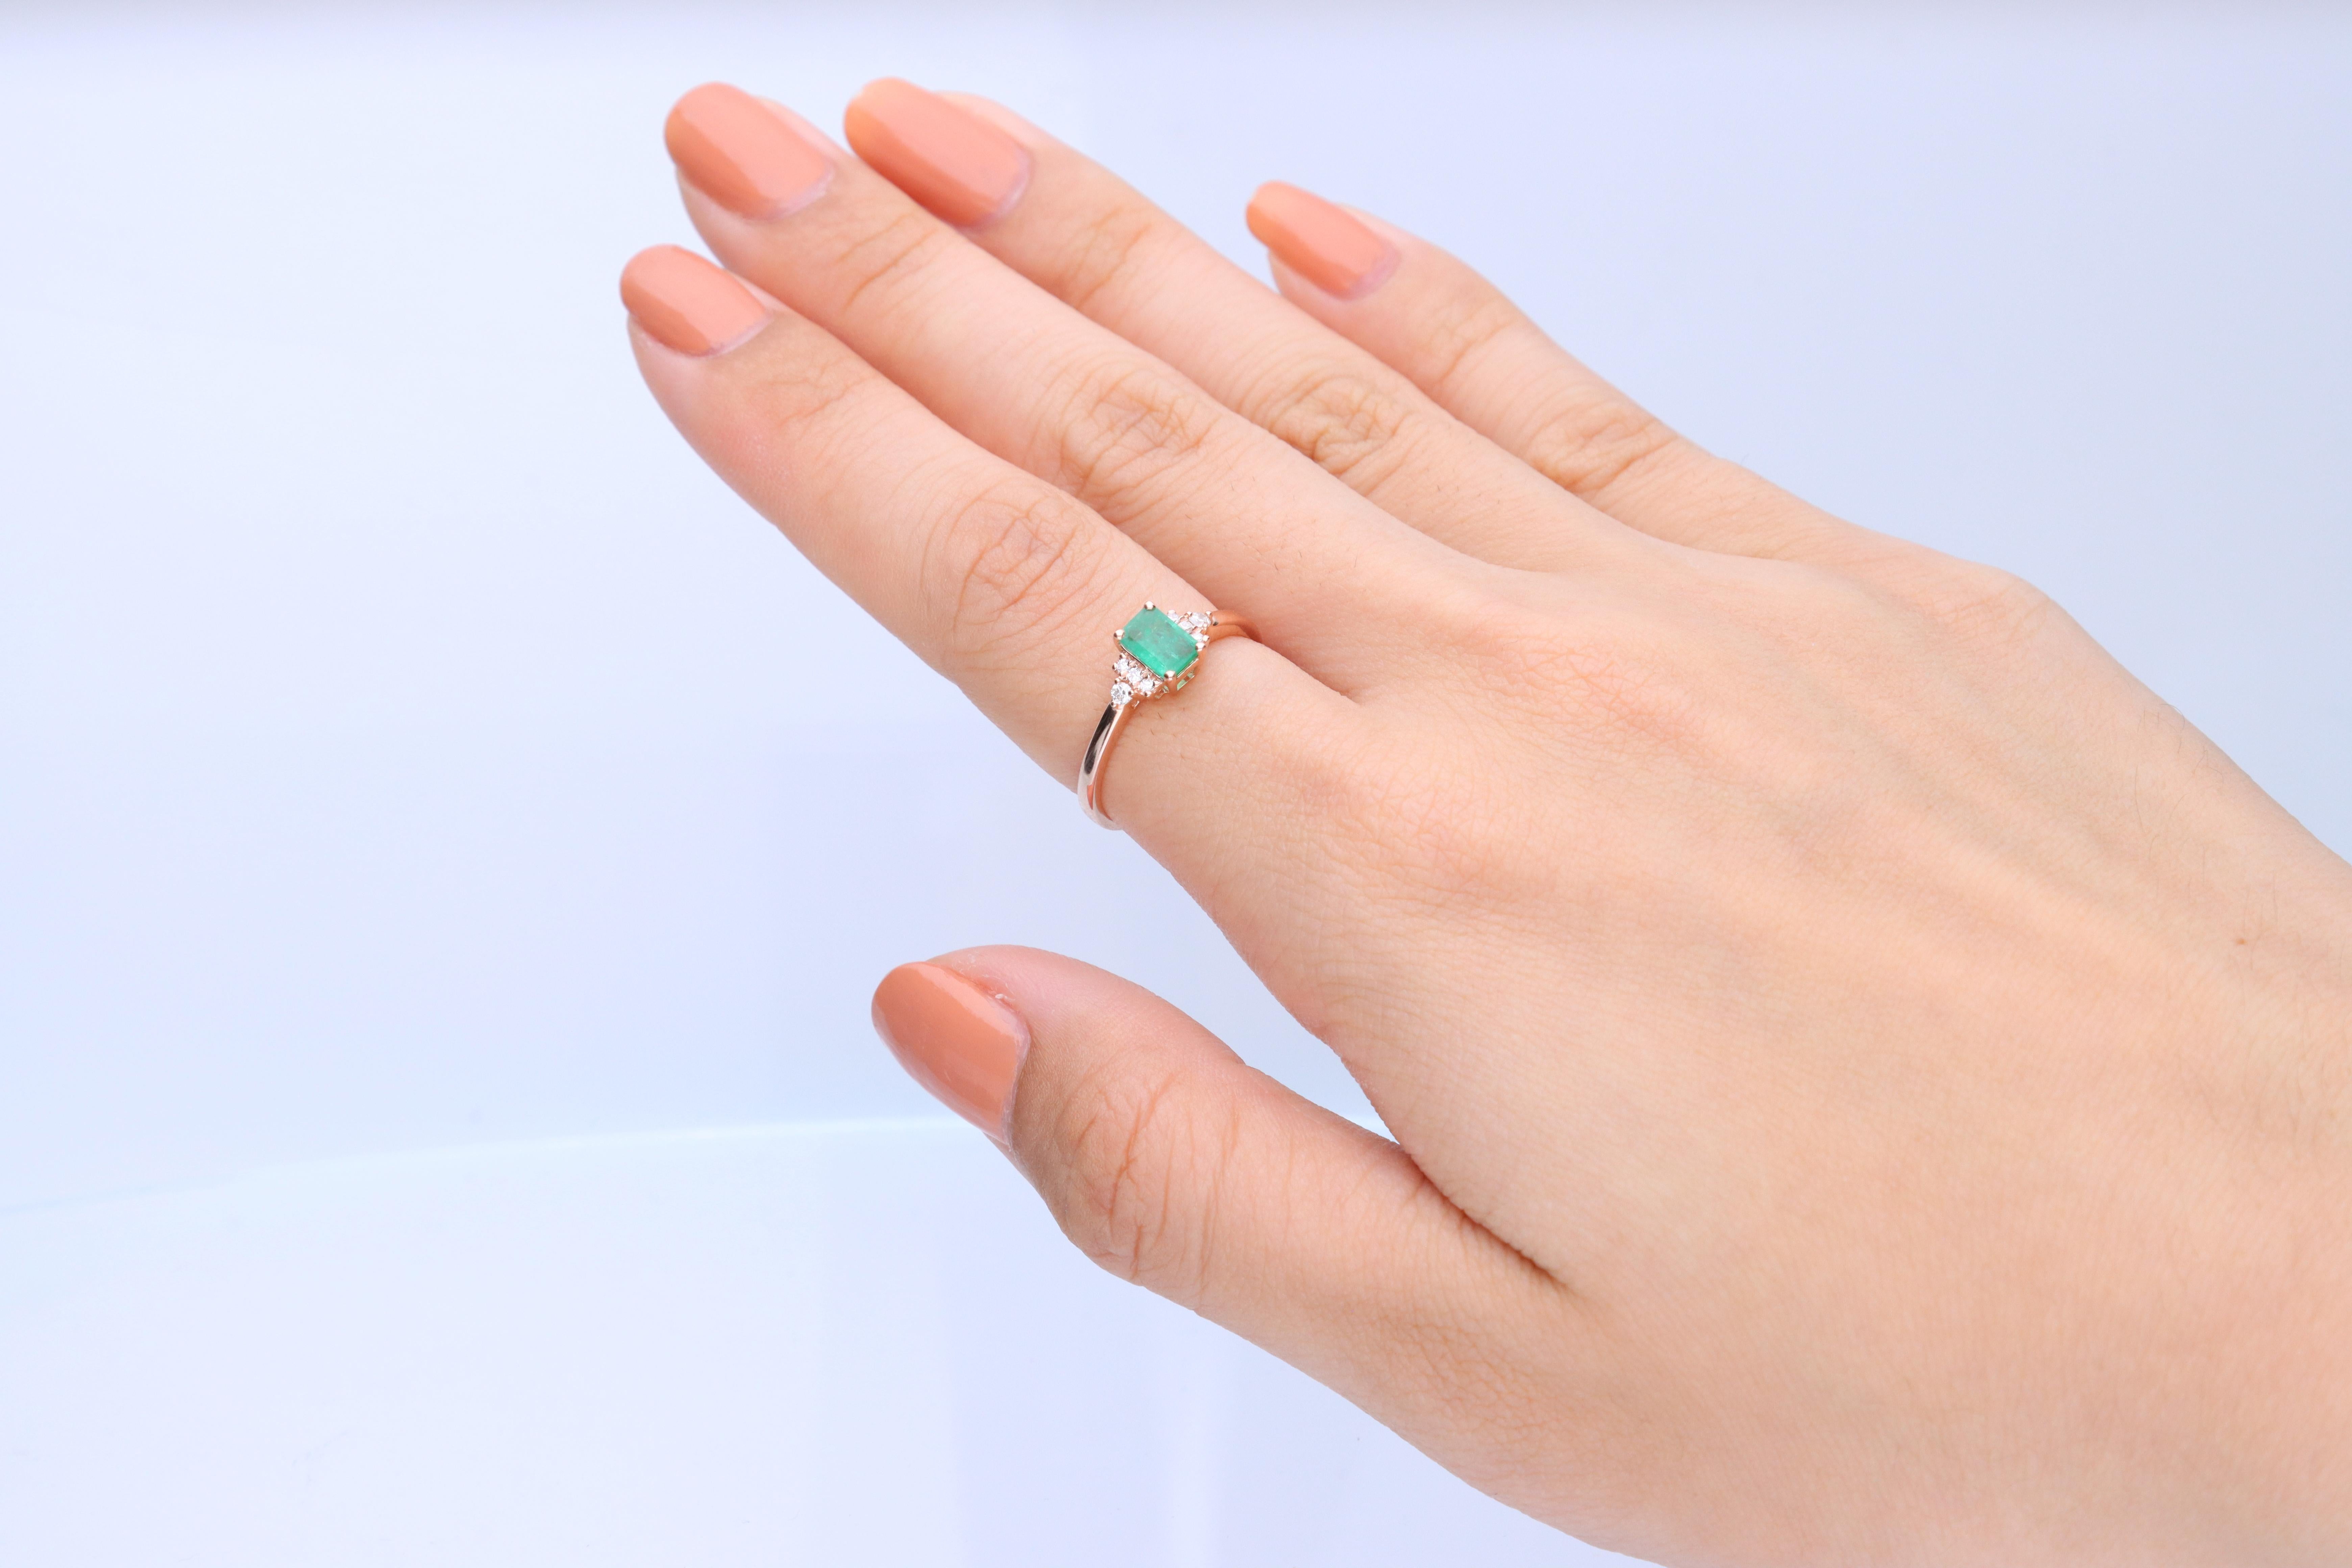 Decorate yourself in elegance with this Ring is crafted from 10-karat Rose Gold by Gin & Grace. This Ring is made up of 4*6 Emerald Emerald-cut (1 pcs) 0.55 and Round-cut Diamond (8 pcs) 0.08 Carat. This Ring is weight 1.32 grams. This delicate Ring